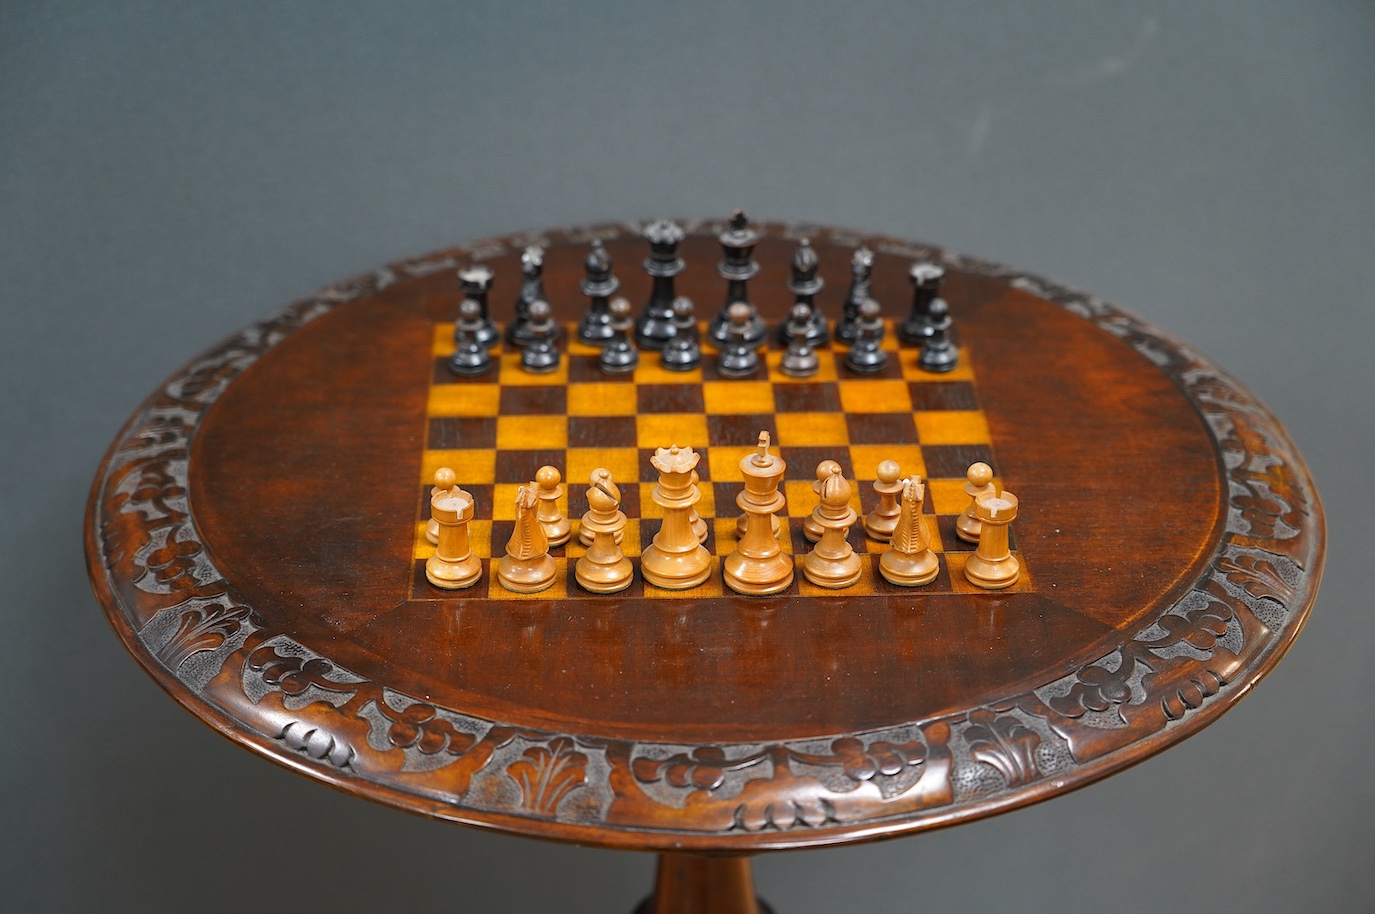 A Victorian carved walnut games table and chess pieces, table 74cm tall, king 6cm tall. Condition - good